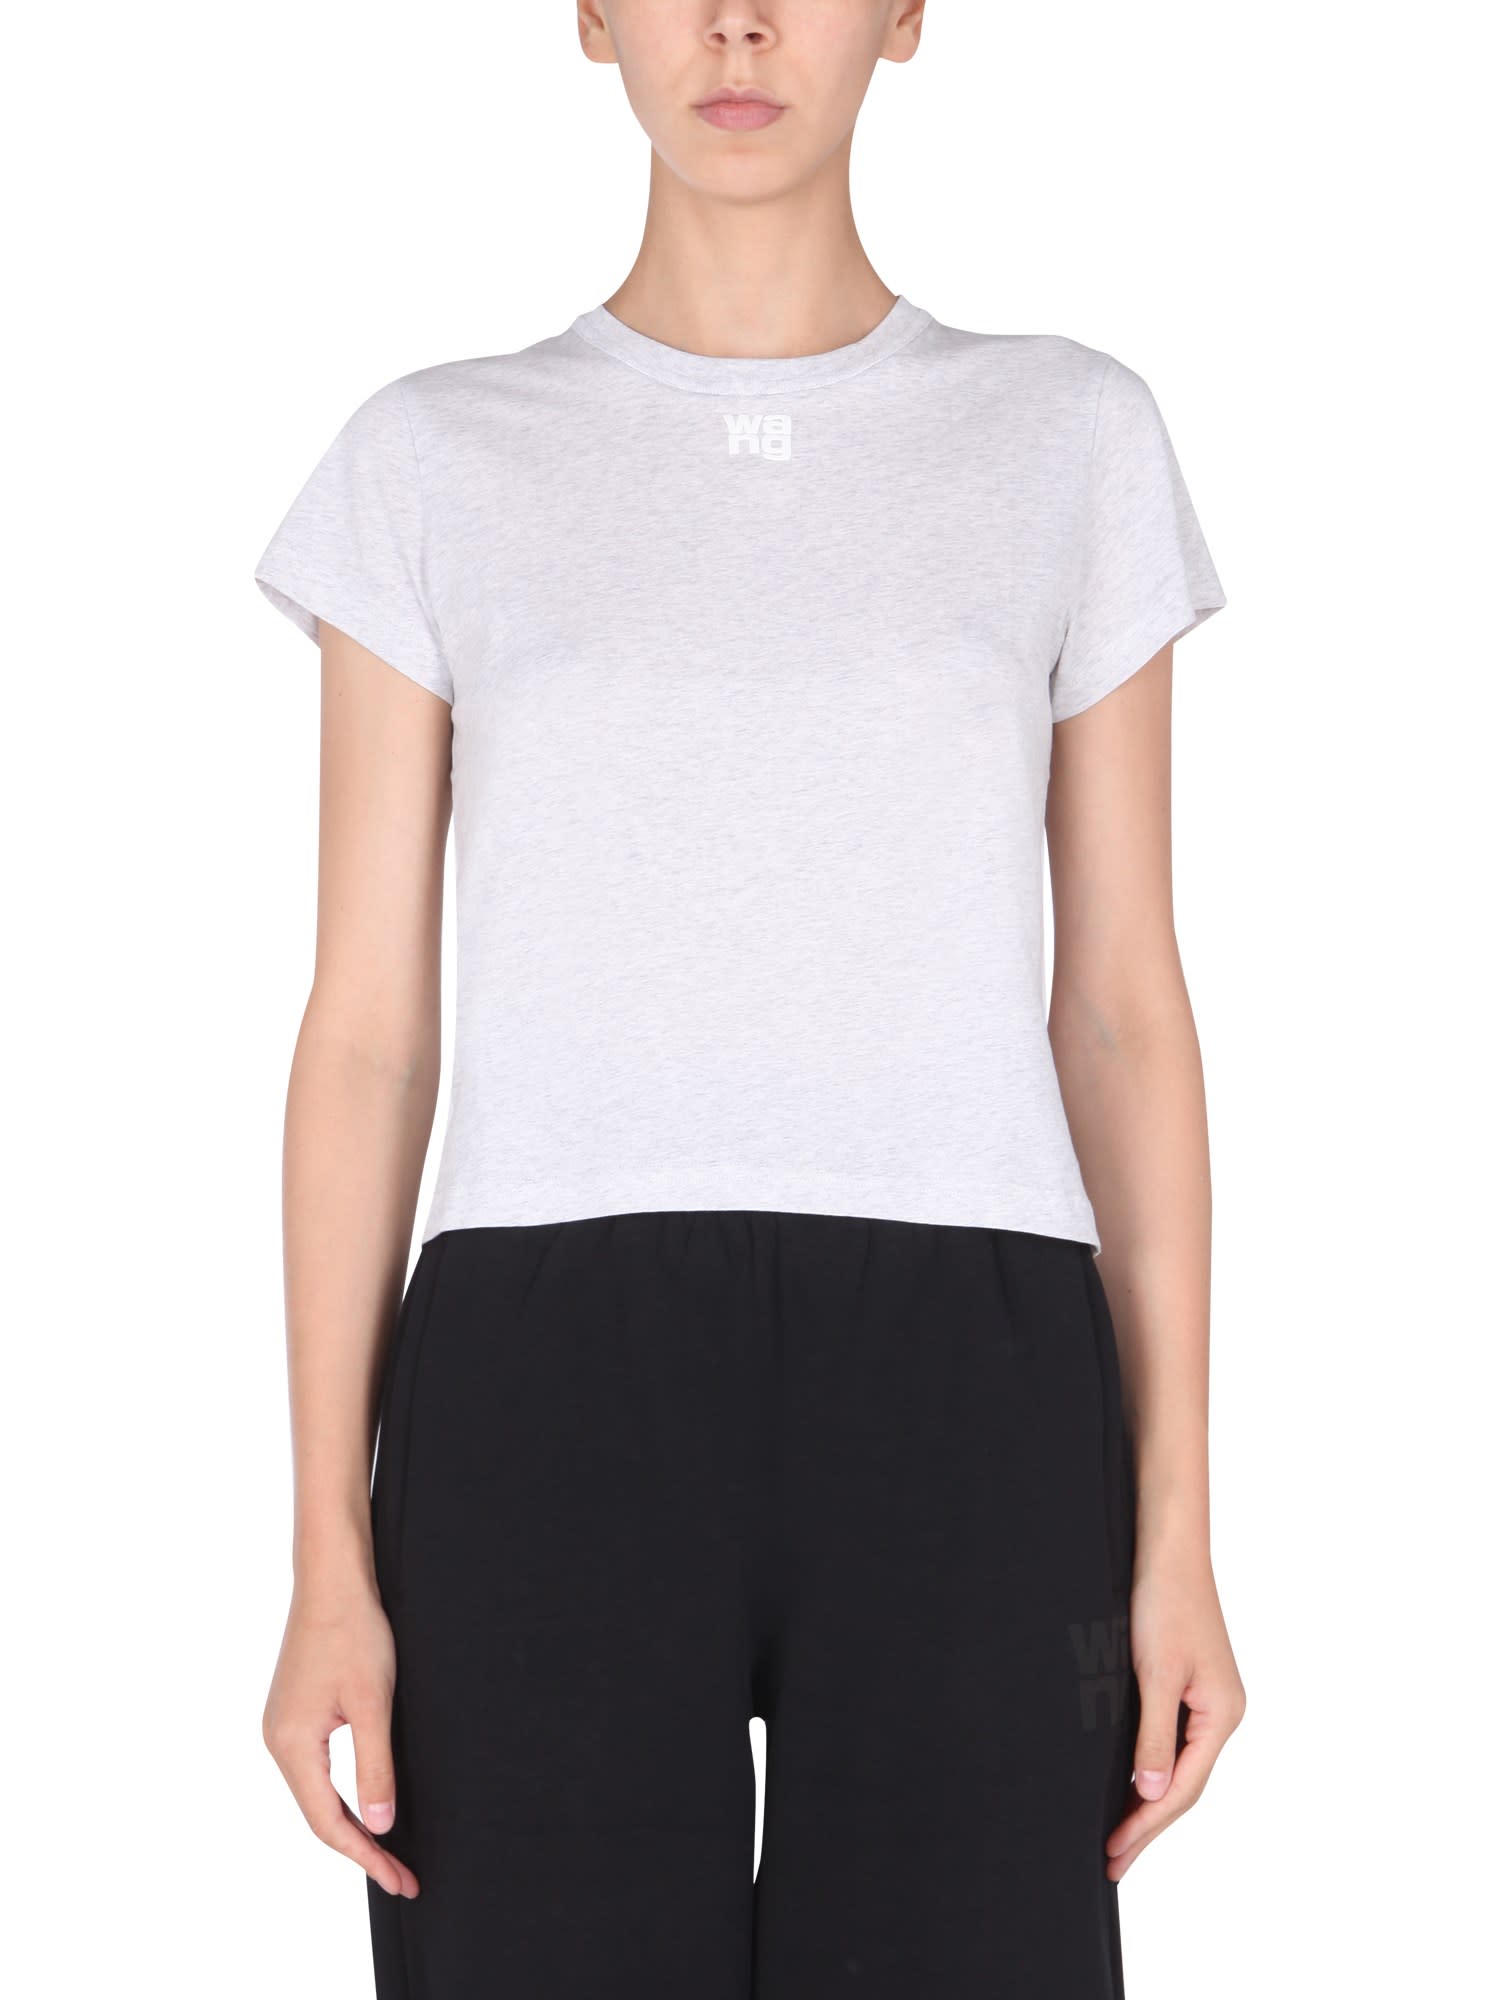 T by Alexander Wang Cropped T-shirt